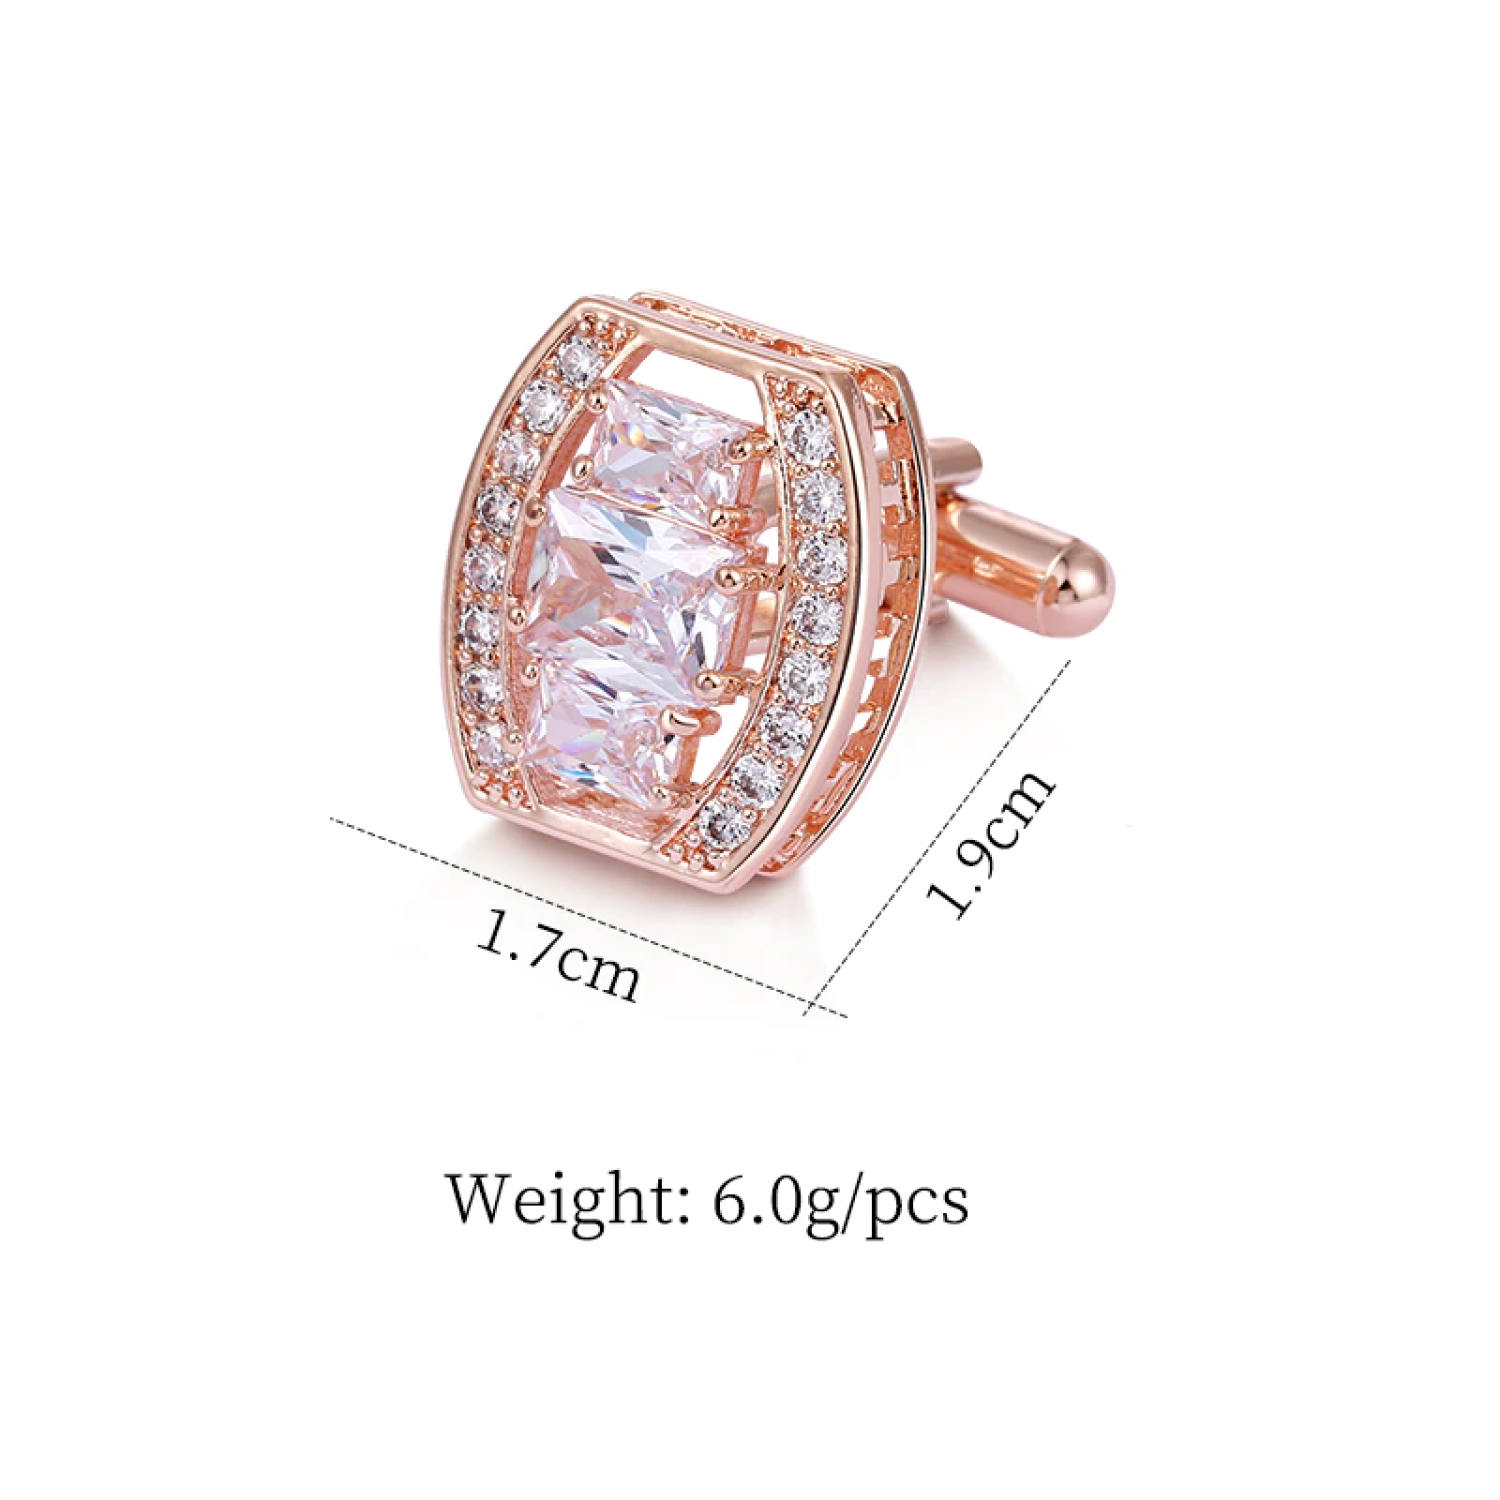 Dimensions: Rose Gold Clear Stone Oval Cufflinks